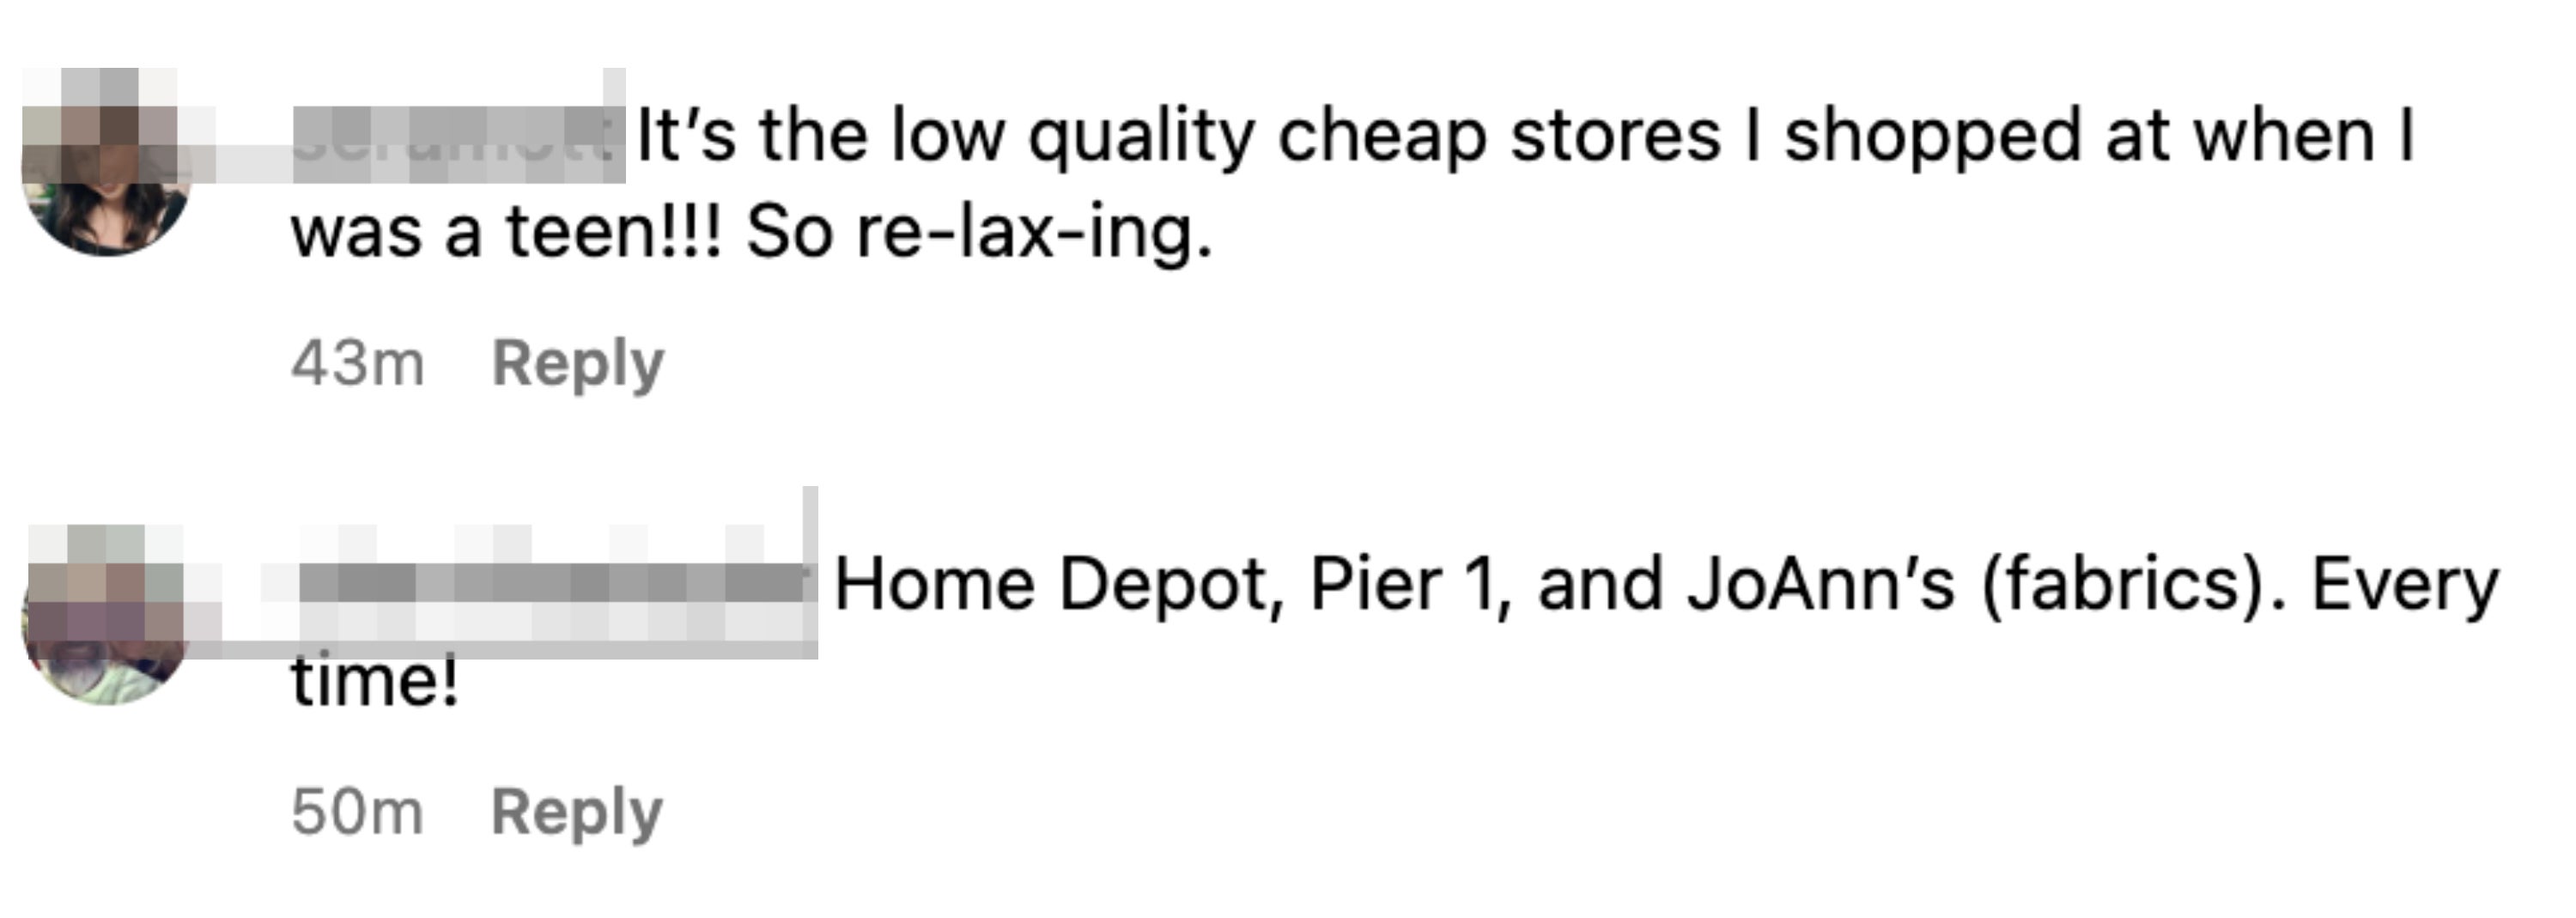 &quot;It&#x27;s the low quality cheap stores I shopped at when I was a teen!!! So re-lax-ing&quot;